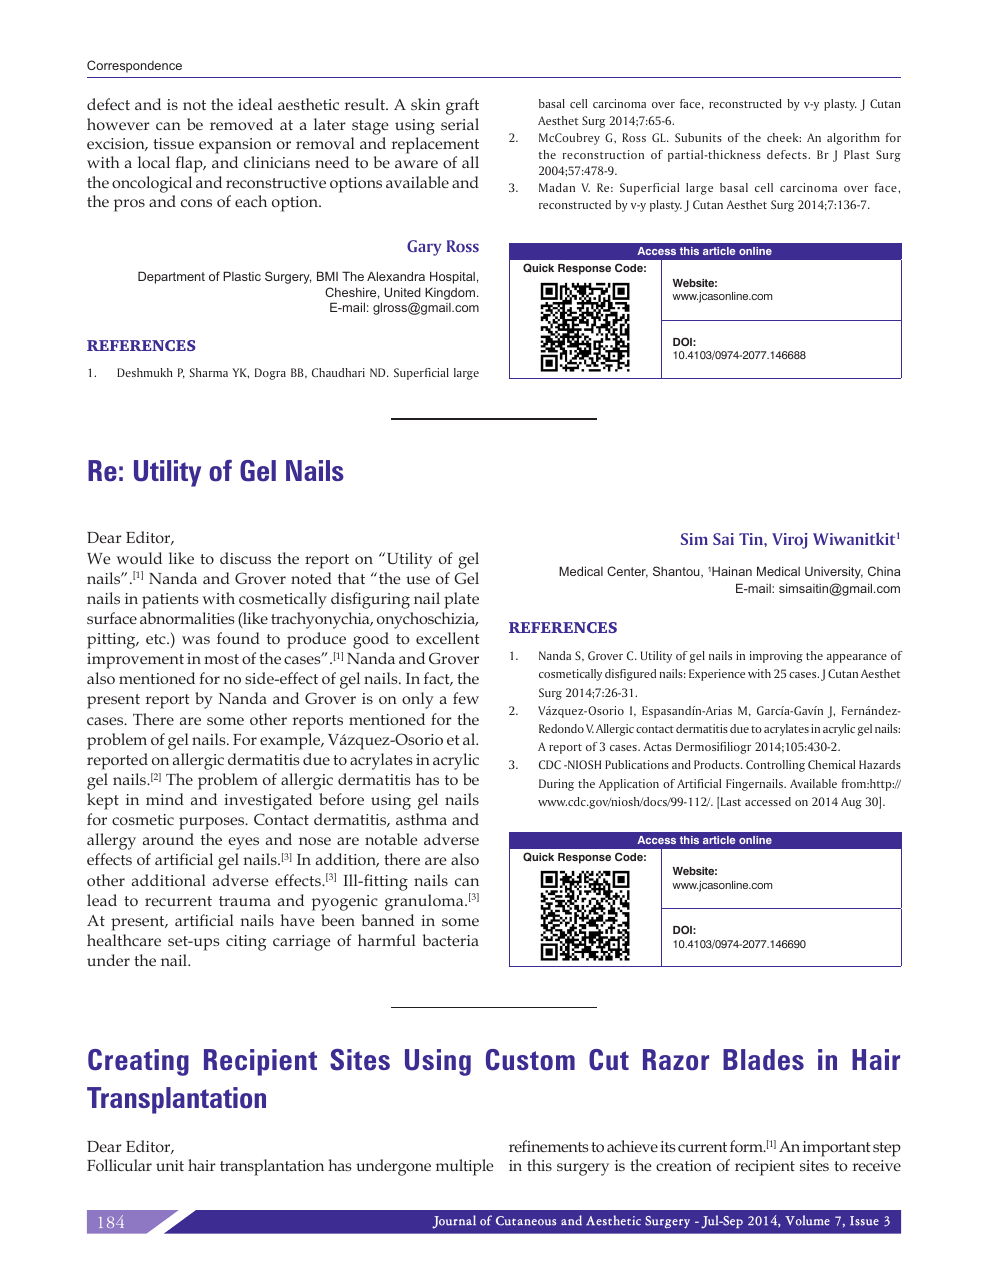 Creating Recipient Sites Using Custom Cut Razor Blades In Hair Transplantation Topic Of Research Paper In Clinical Medicine Download Scholarly Article Pdf And Read For Free On Cyberleninka Open Science Hub